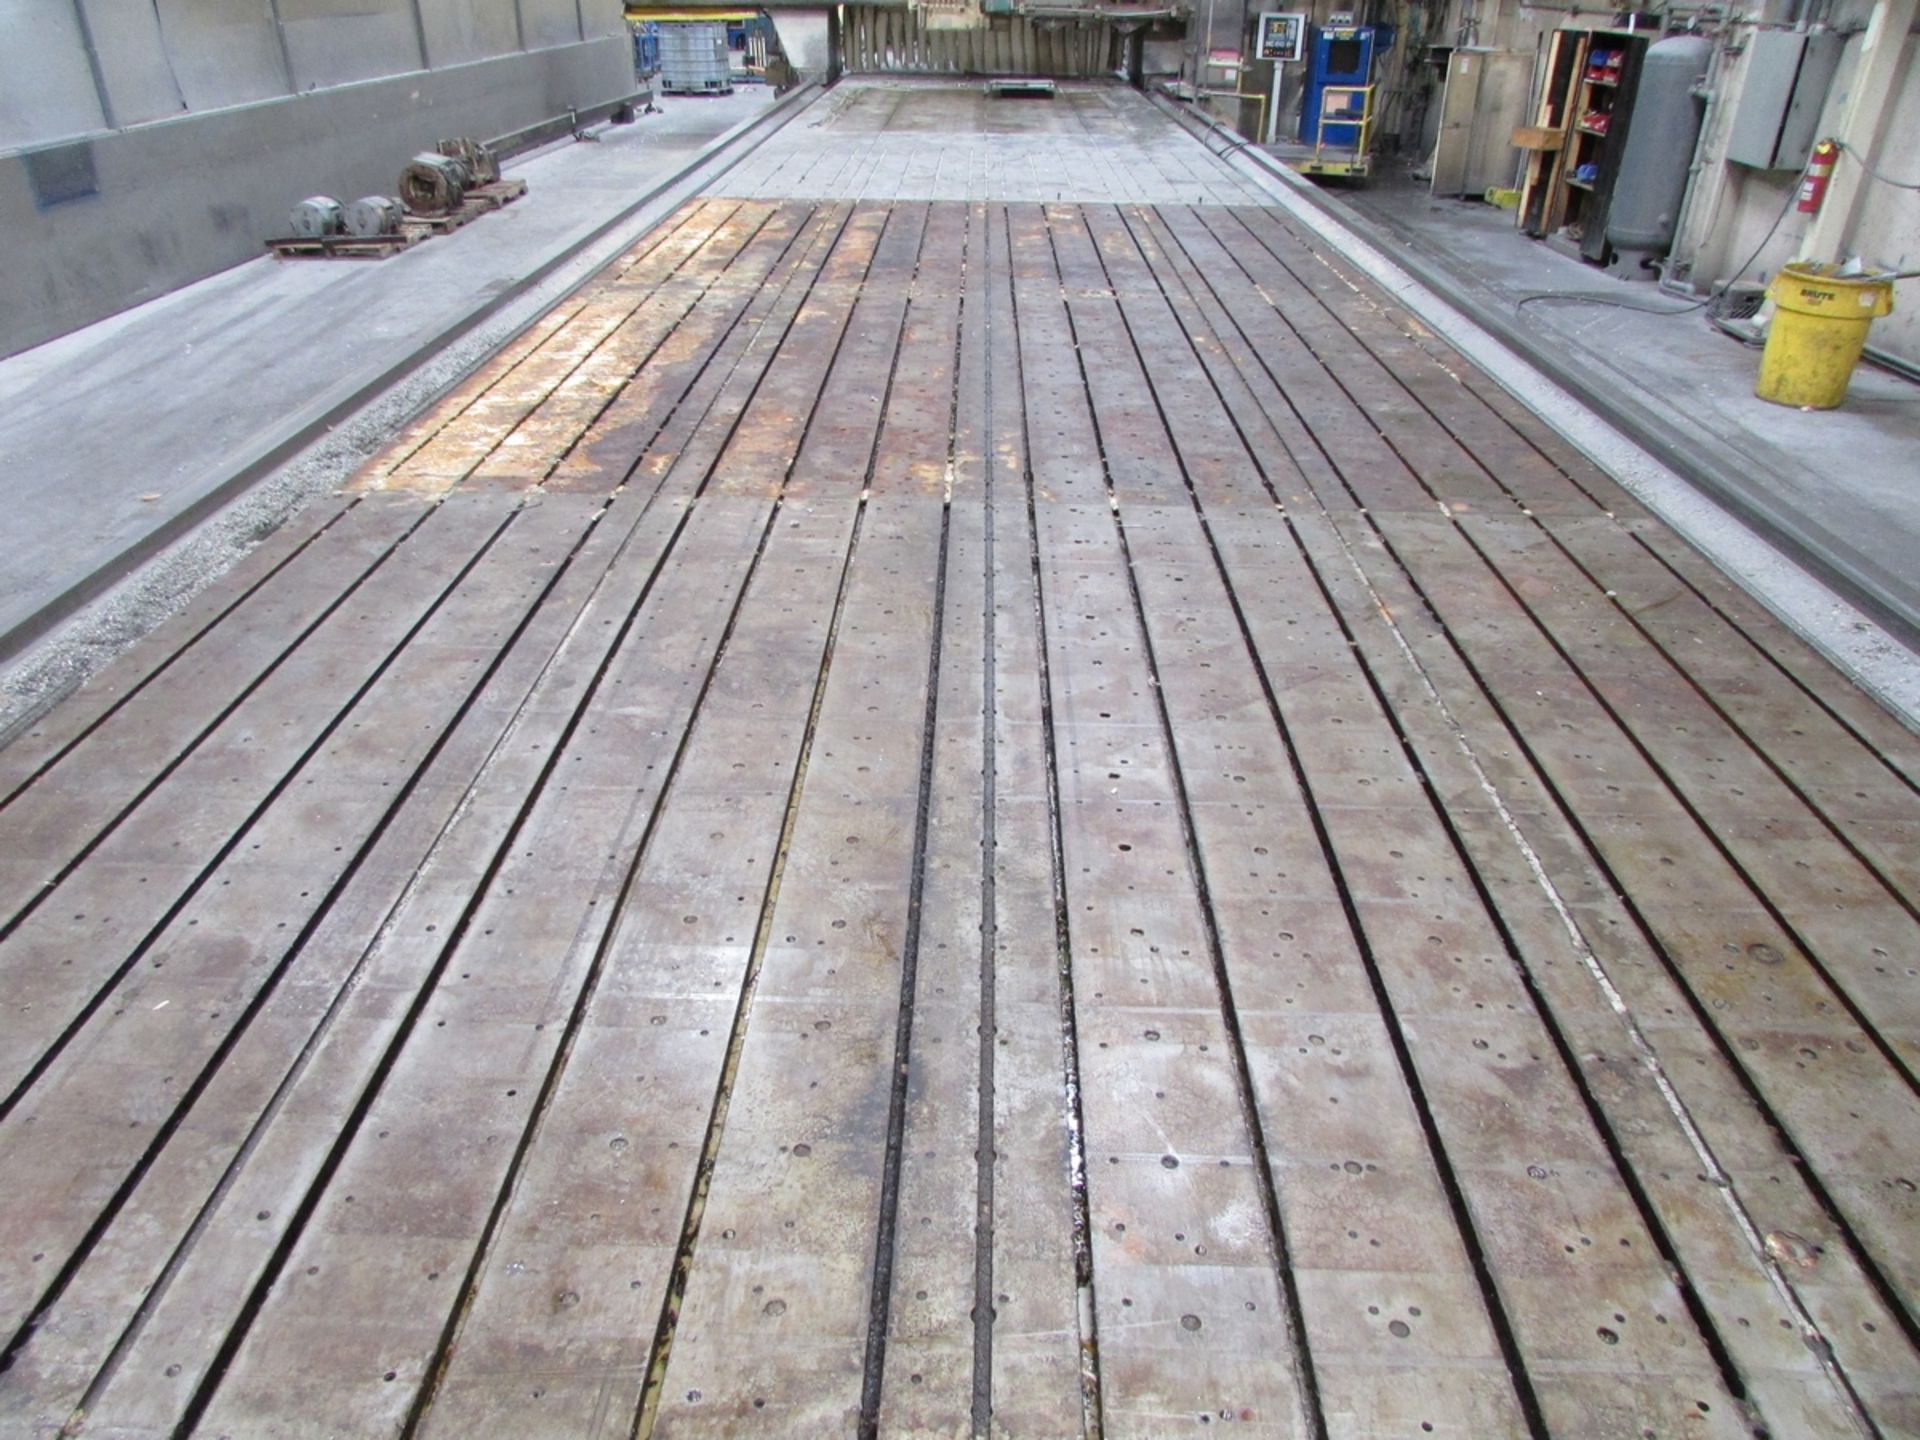 T-SLOTTED GANTRY MILL TABLE, 120' X 160", 125' BEDWAY LENGTH - Image 18 of 18